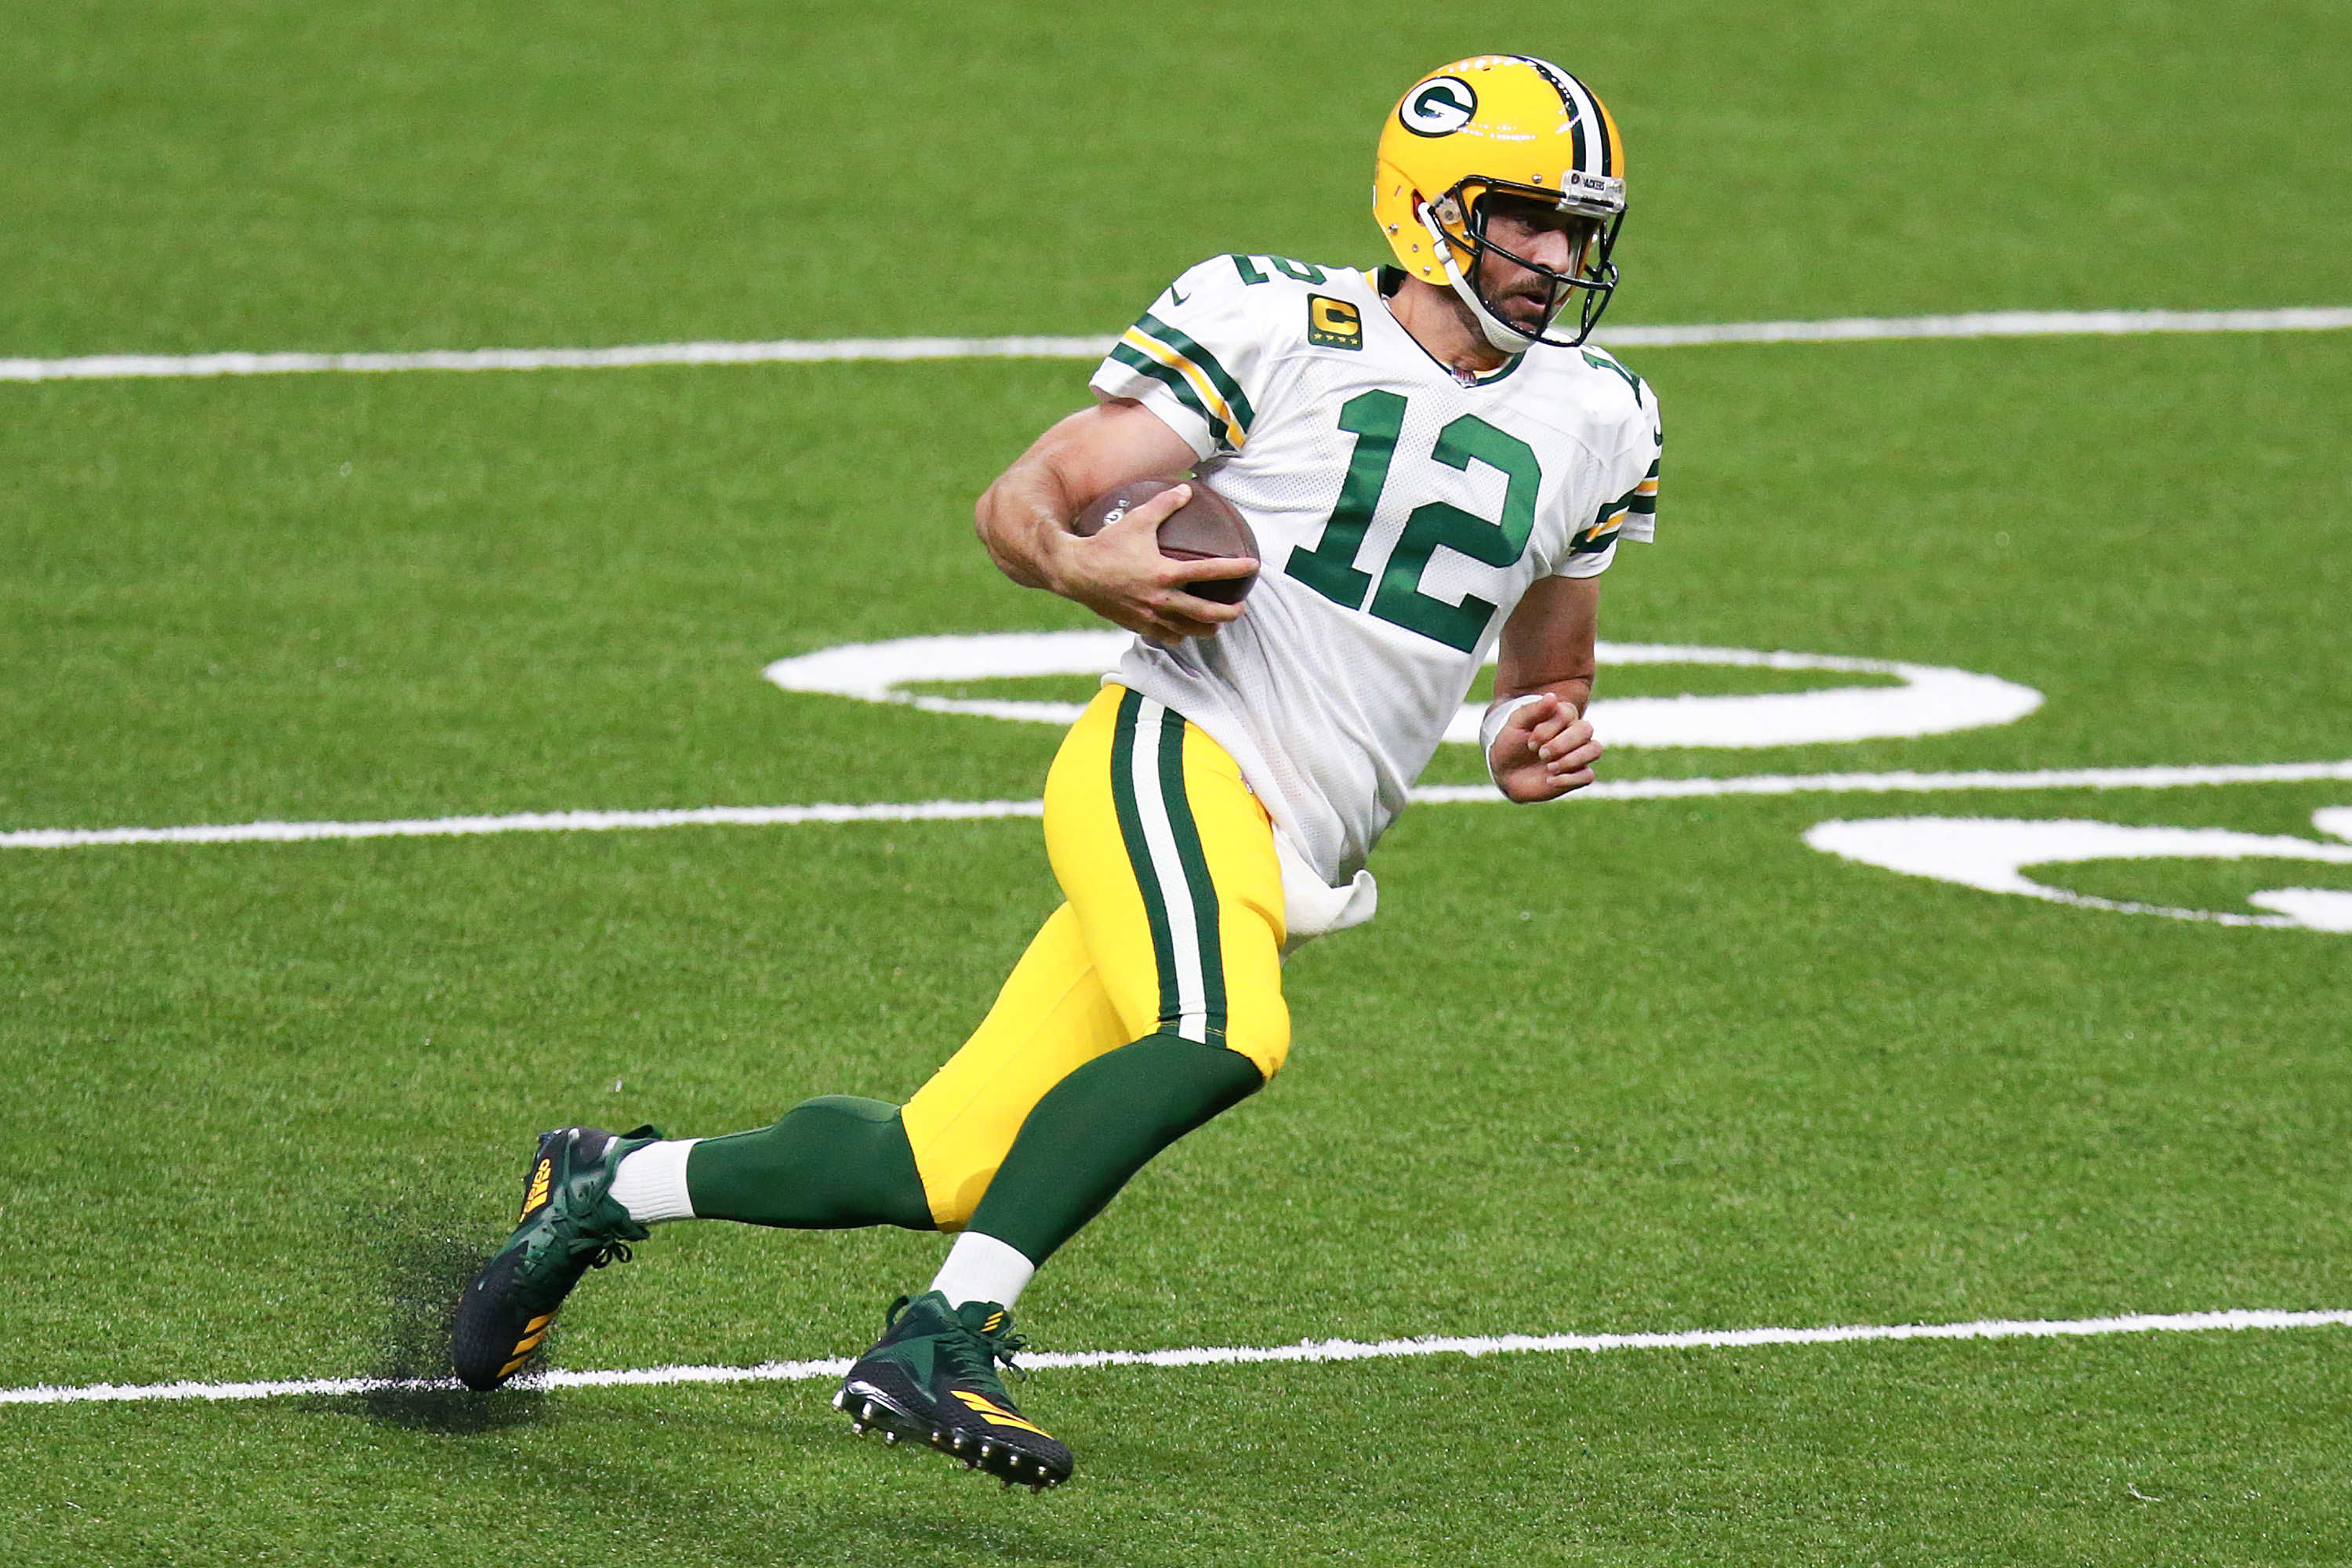 Aaron Rodgers and the Green Bay Packers are setting records.